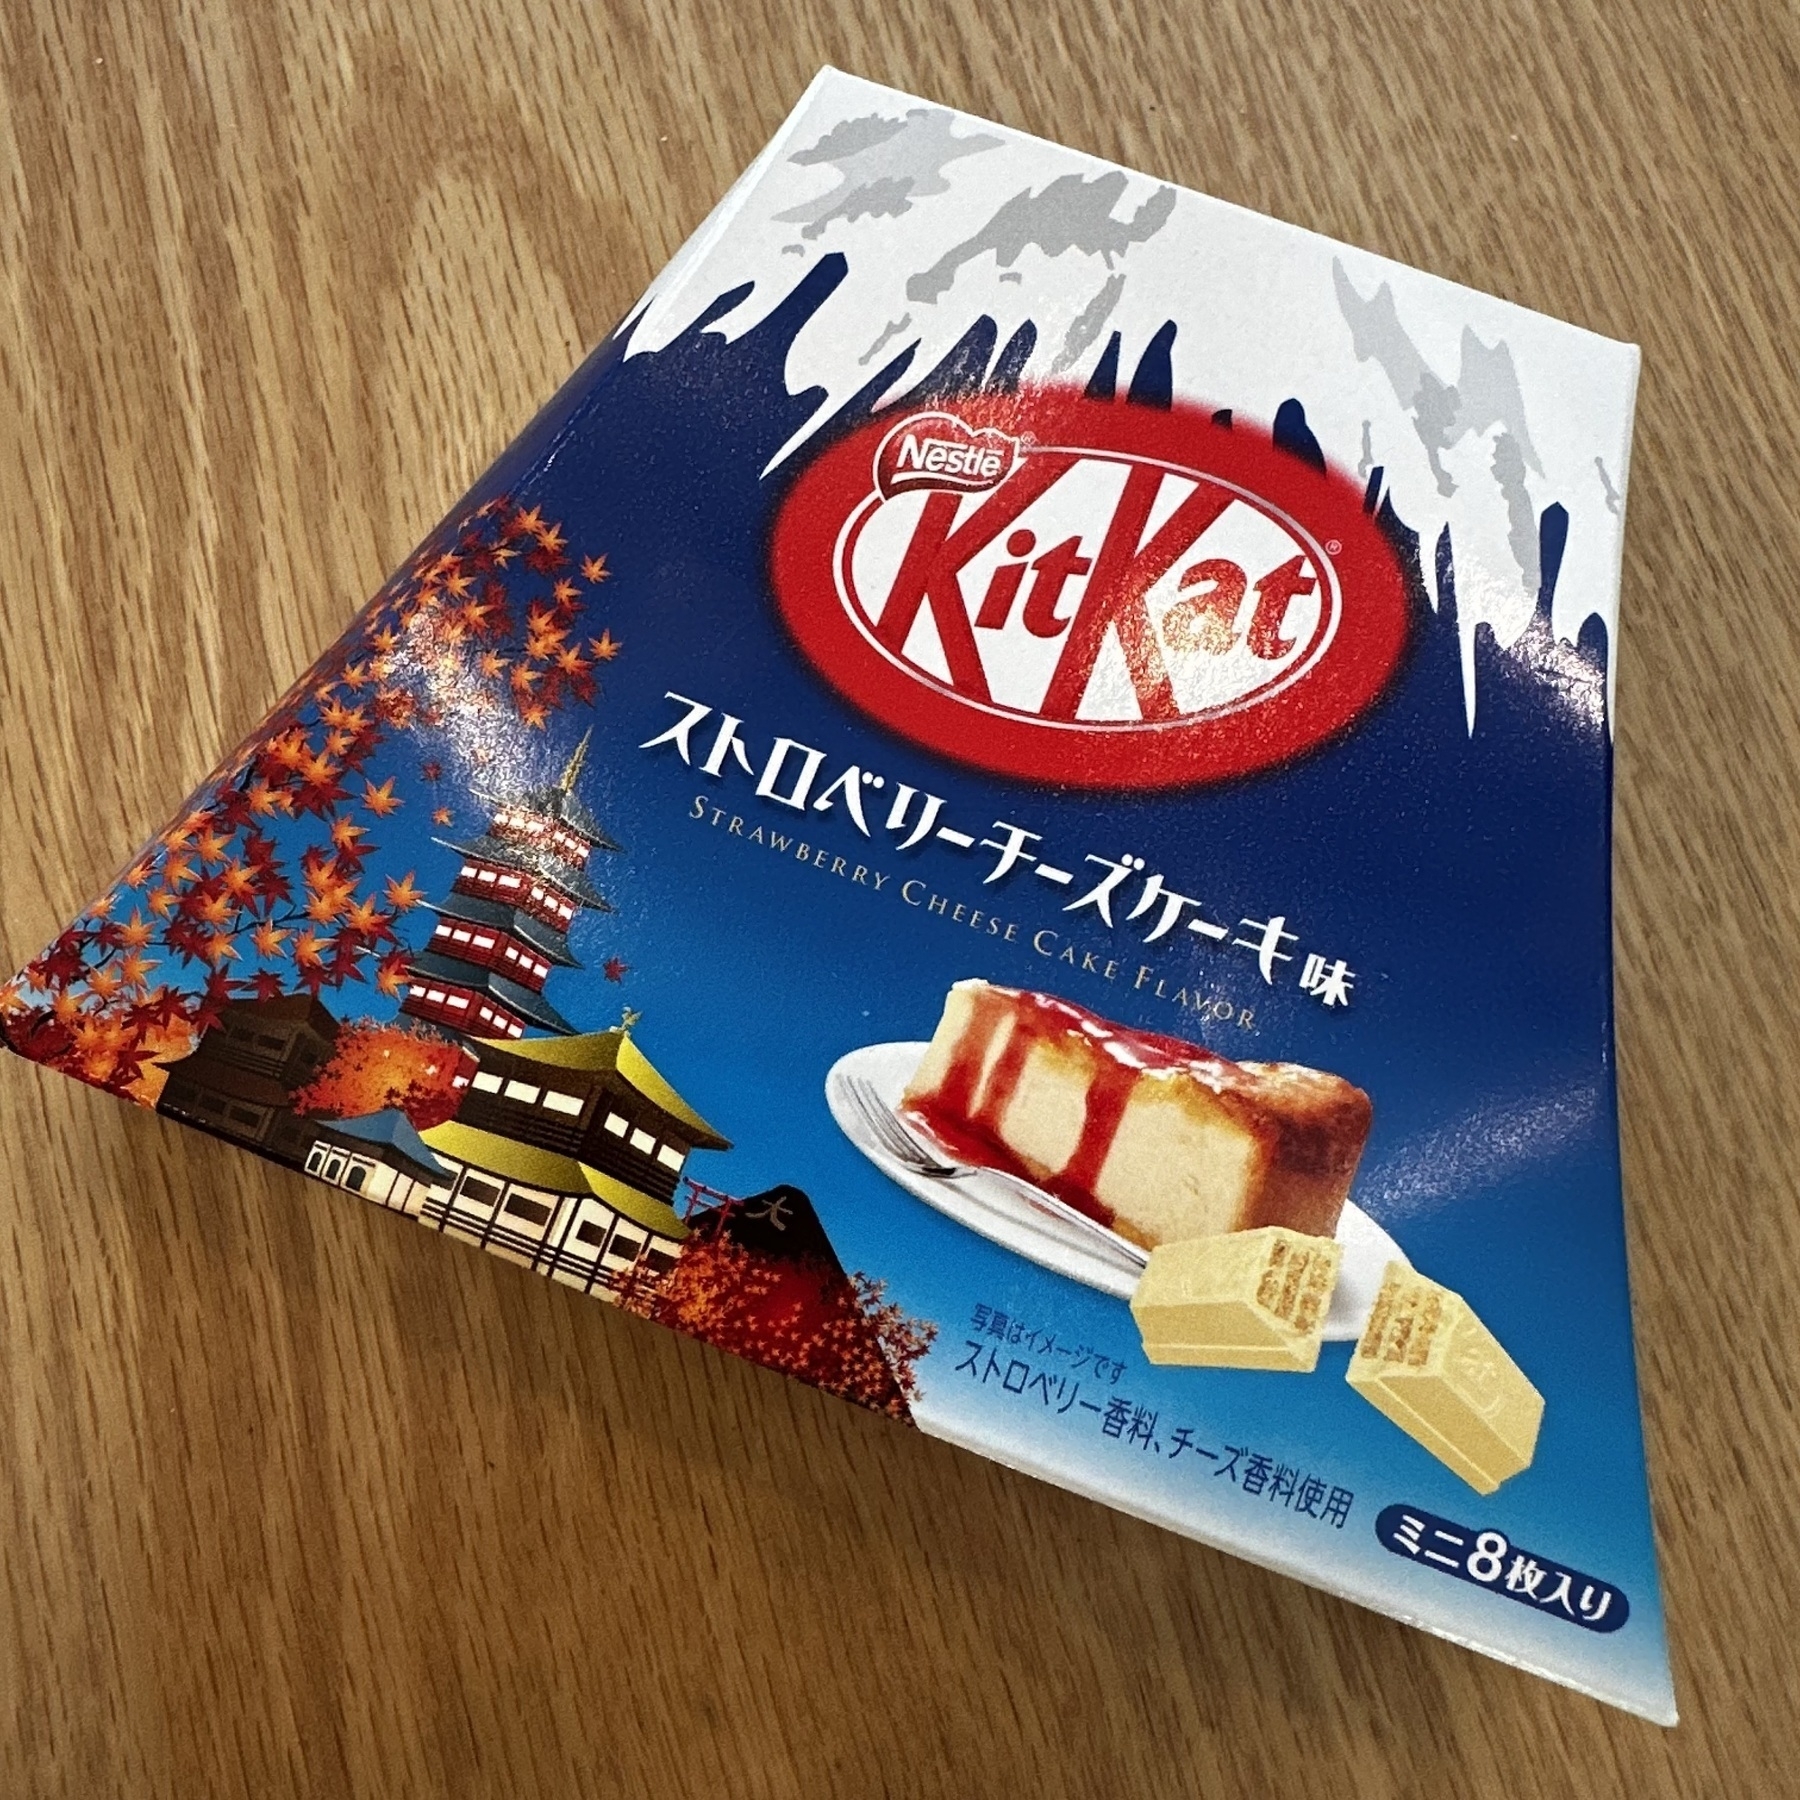 Strawberry cheese cake flavor KitKats from Japan